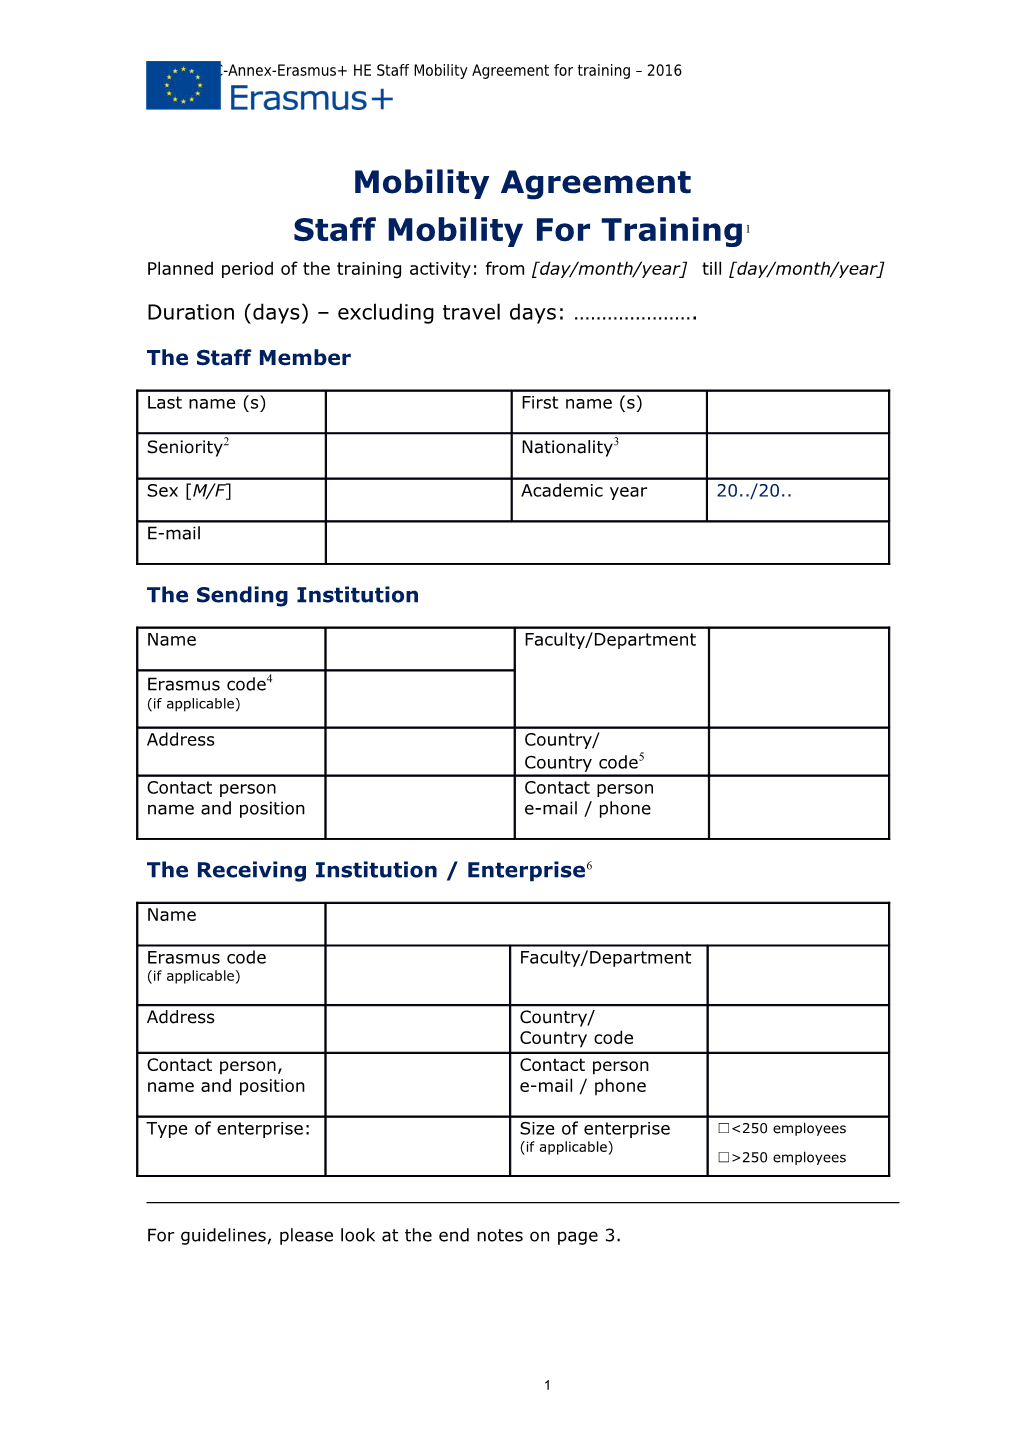 Gfna-II.7-C-Annex-Erasmus+ HE Staff Mobility Agreement for Training 2016